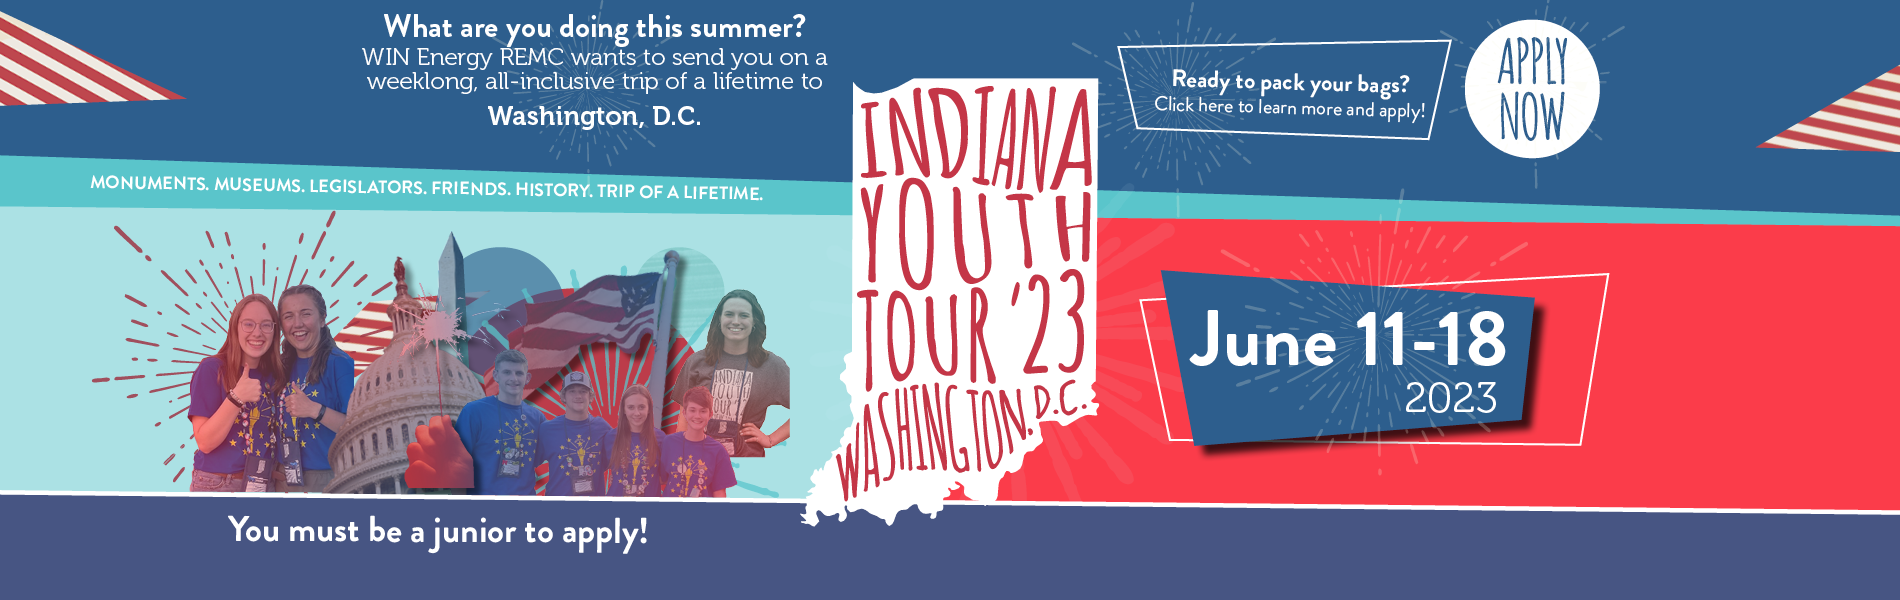 Blue and Red graphic for Indiana Youth Tour to Washington DC. Call to action to apply for the trip on June 11-18 2023. Apply today! 